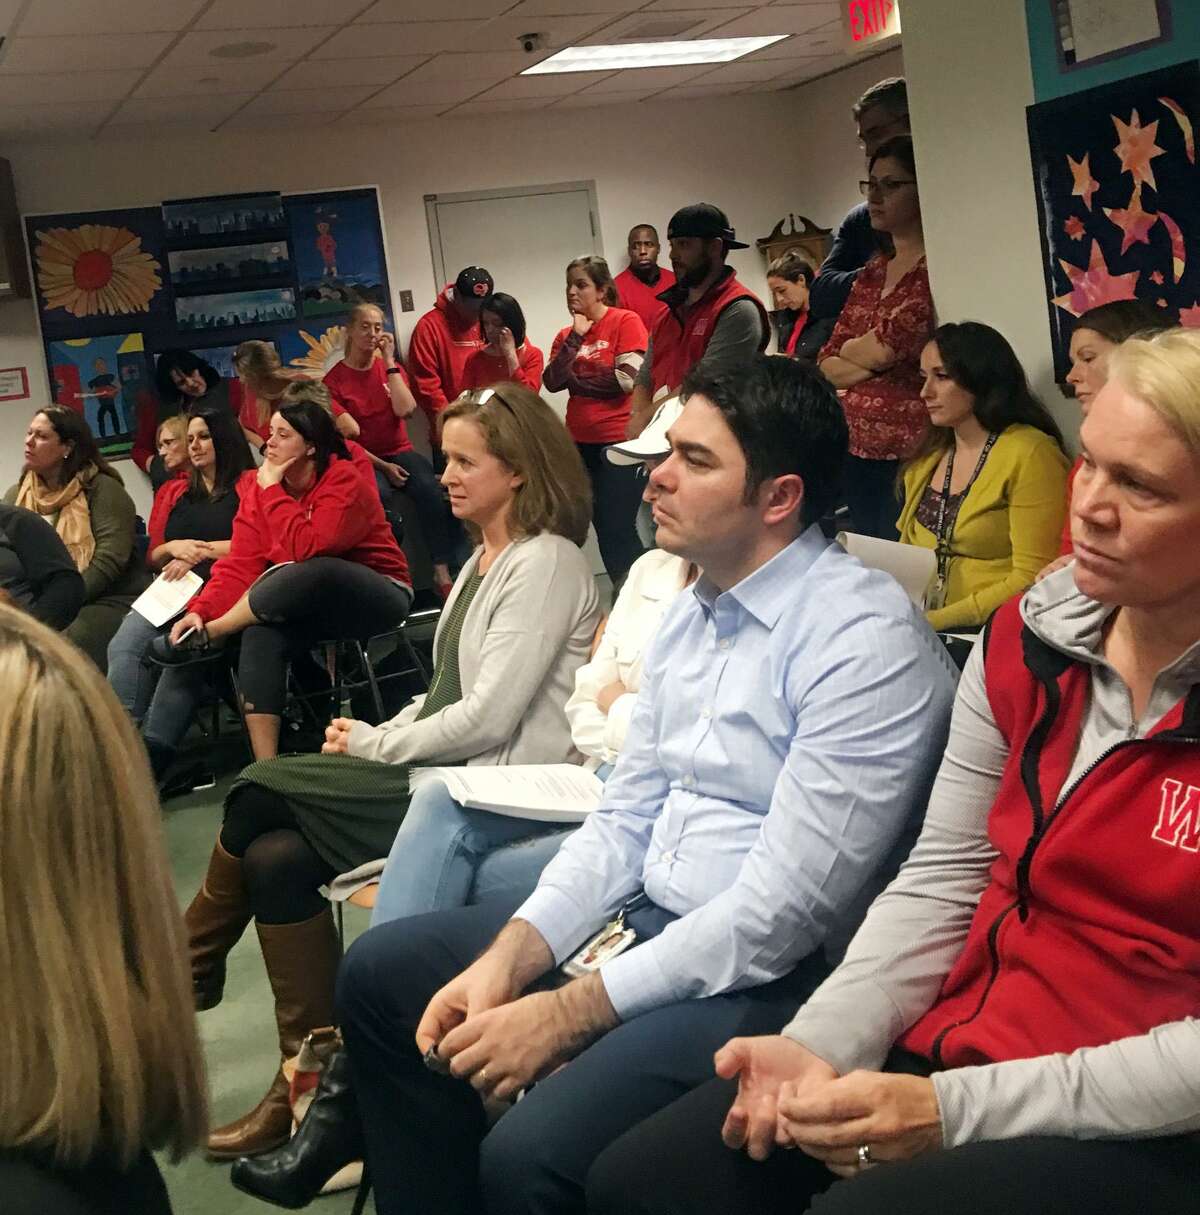 Parents and staff from Westover Magnet Elementary School showed up to a Board of Education meeting on Oct. 23, 2018 in Stamford, Conn. to complain about the issues caused by pervasive mold in the building.